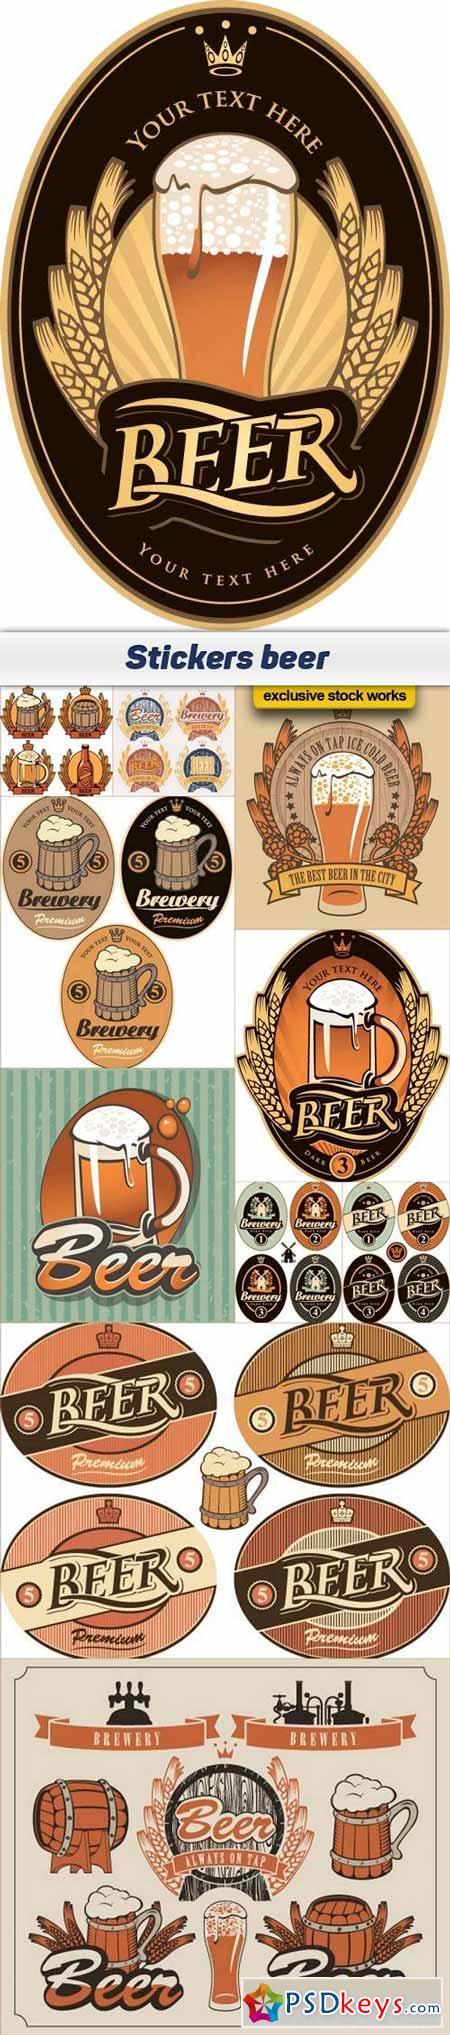 Stickers beer 11x EPS